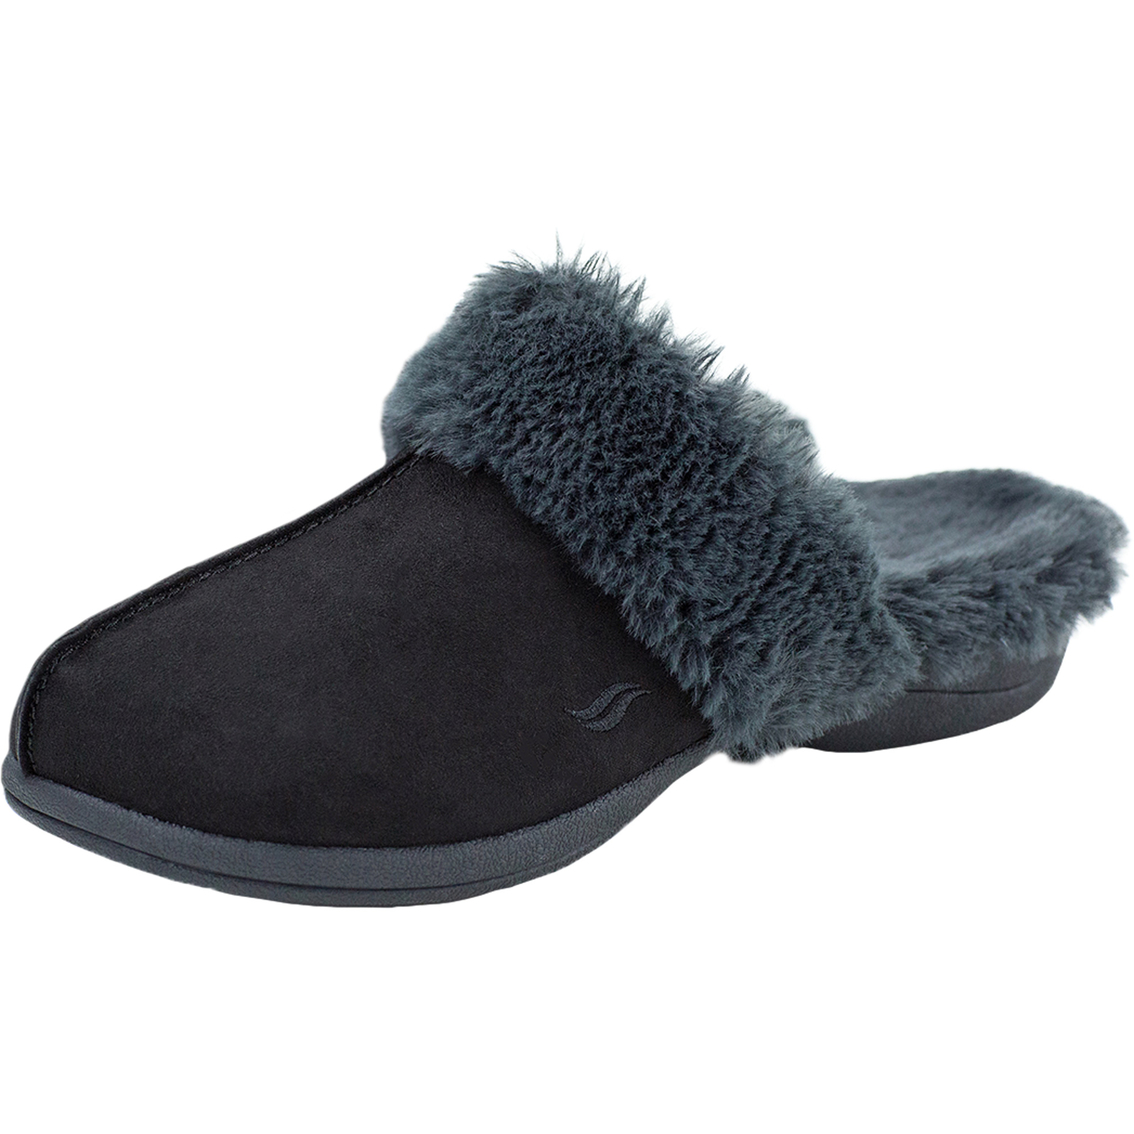 Powerstep Women's Luxe Orthotic Slippers - Image 2 of 5